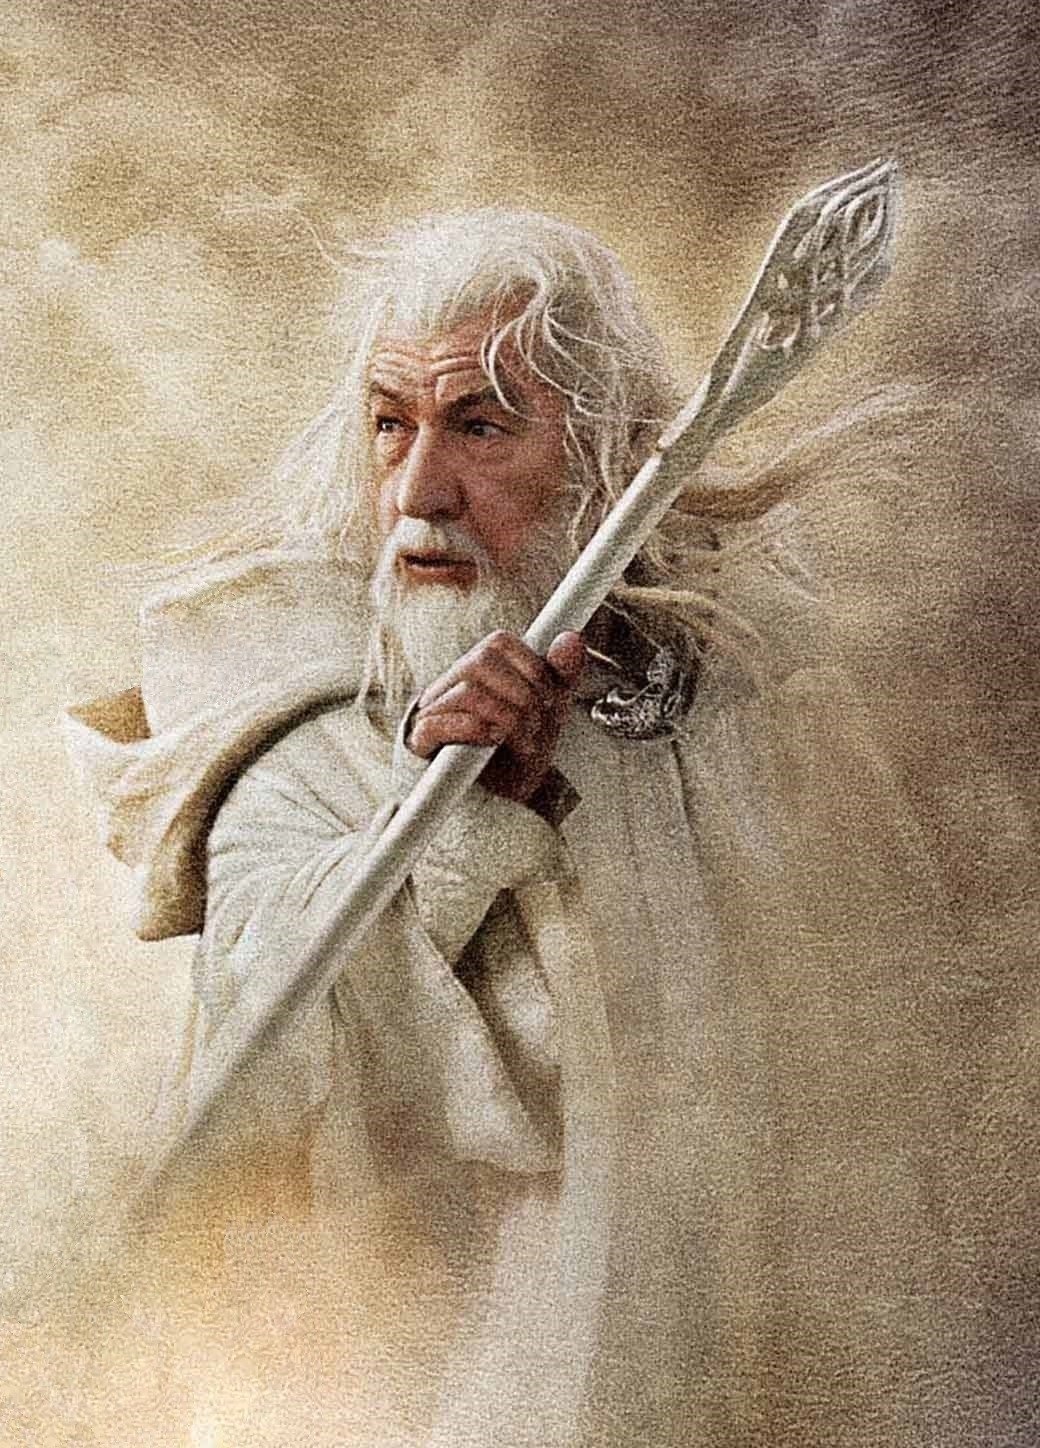 The Lord of the Rings Return of the King Gandalf the White Poster.jpg